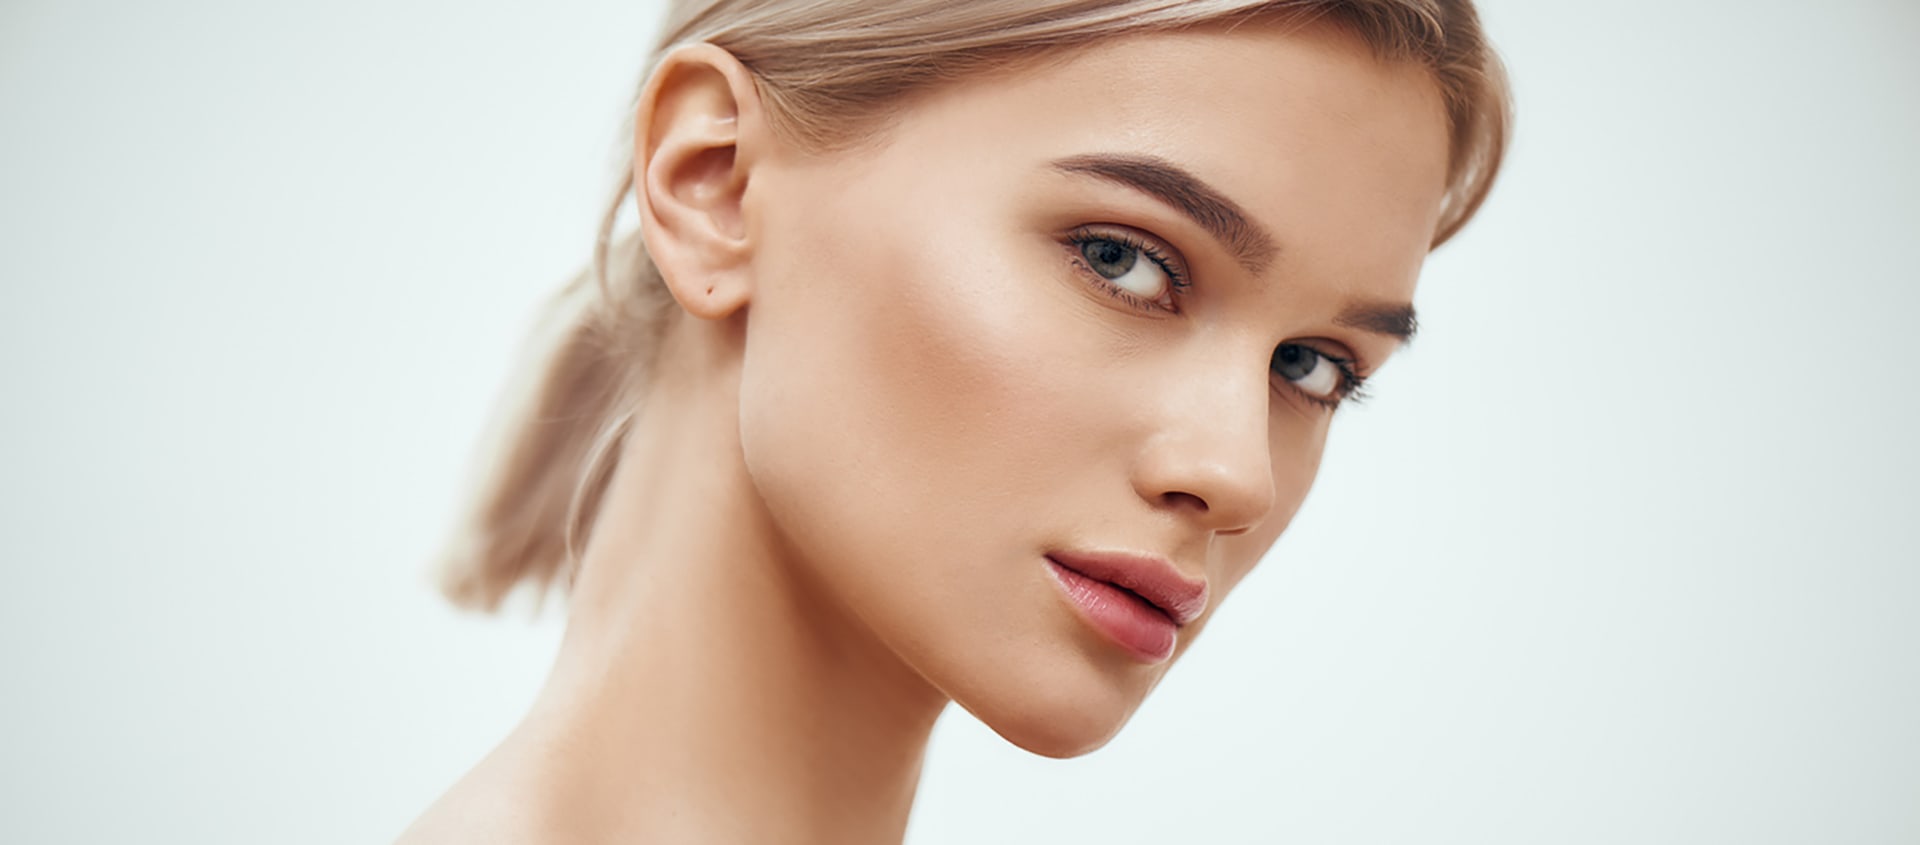 ACHIEVING TIMELESS BEAUTY WITH FACELIFT SURGERY